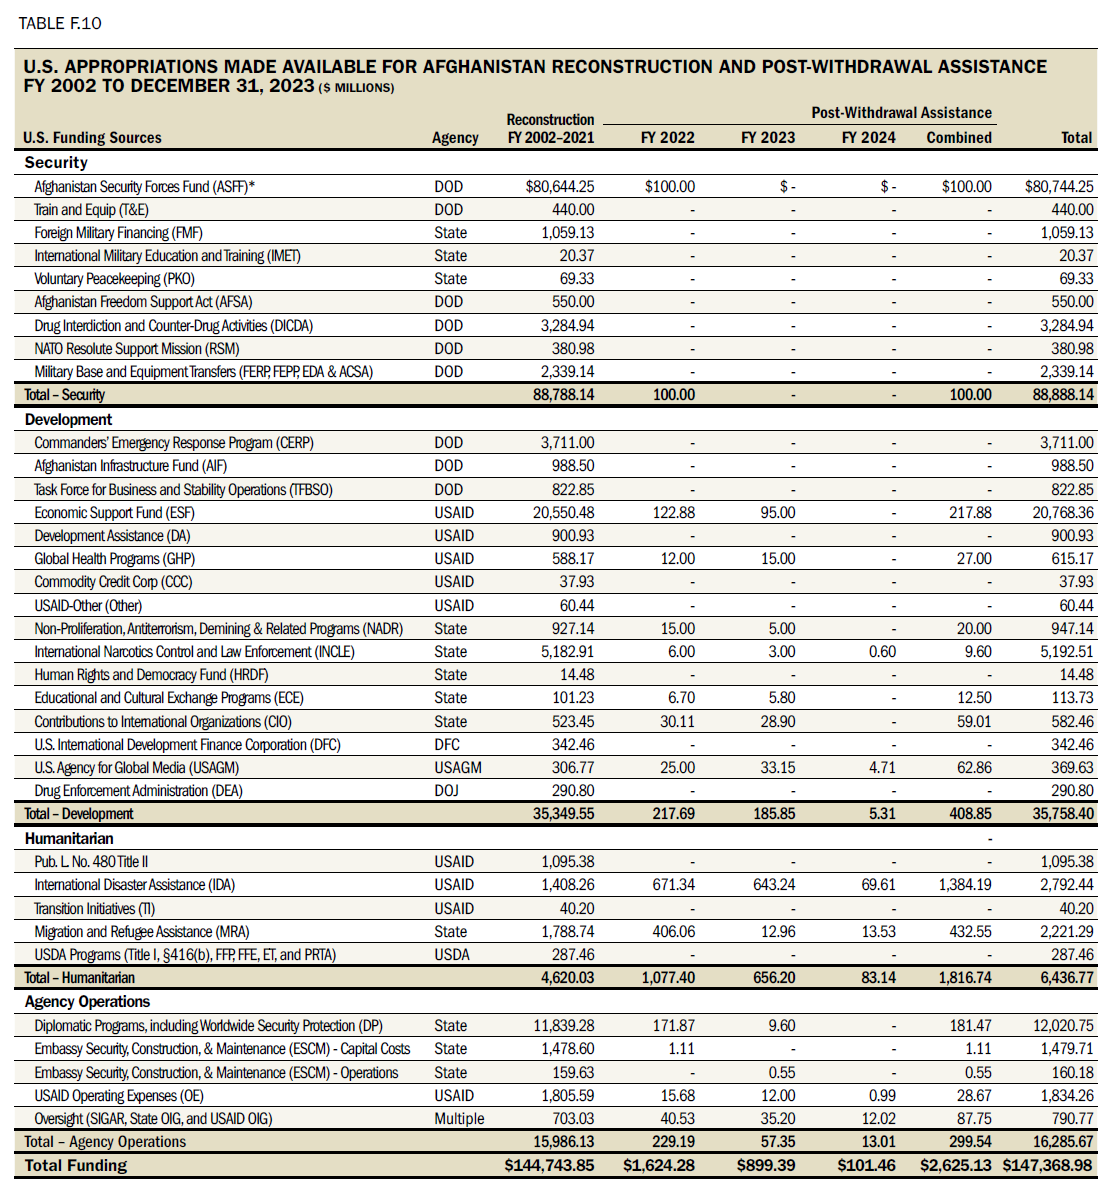 Table F.10 U.S. U.S. Appropriations Made Available for Afghanistan Reconstruction and Post-Withdrawal Assistance FY 2002 to December 31, 2023 ($ Millions)